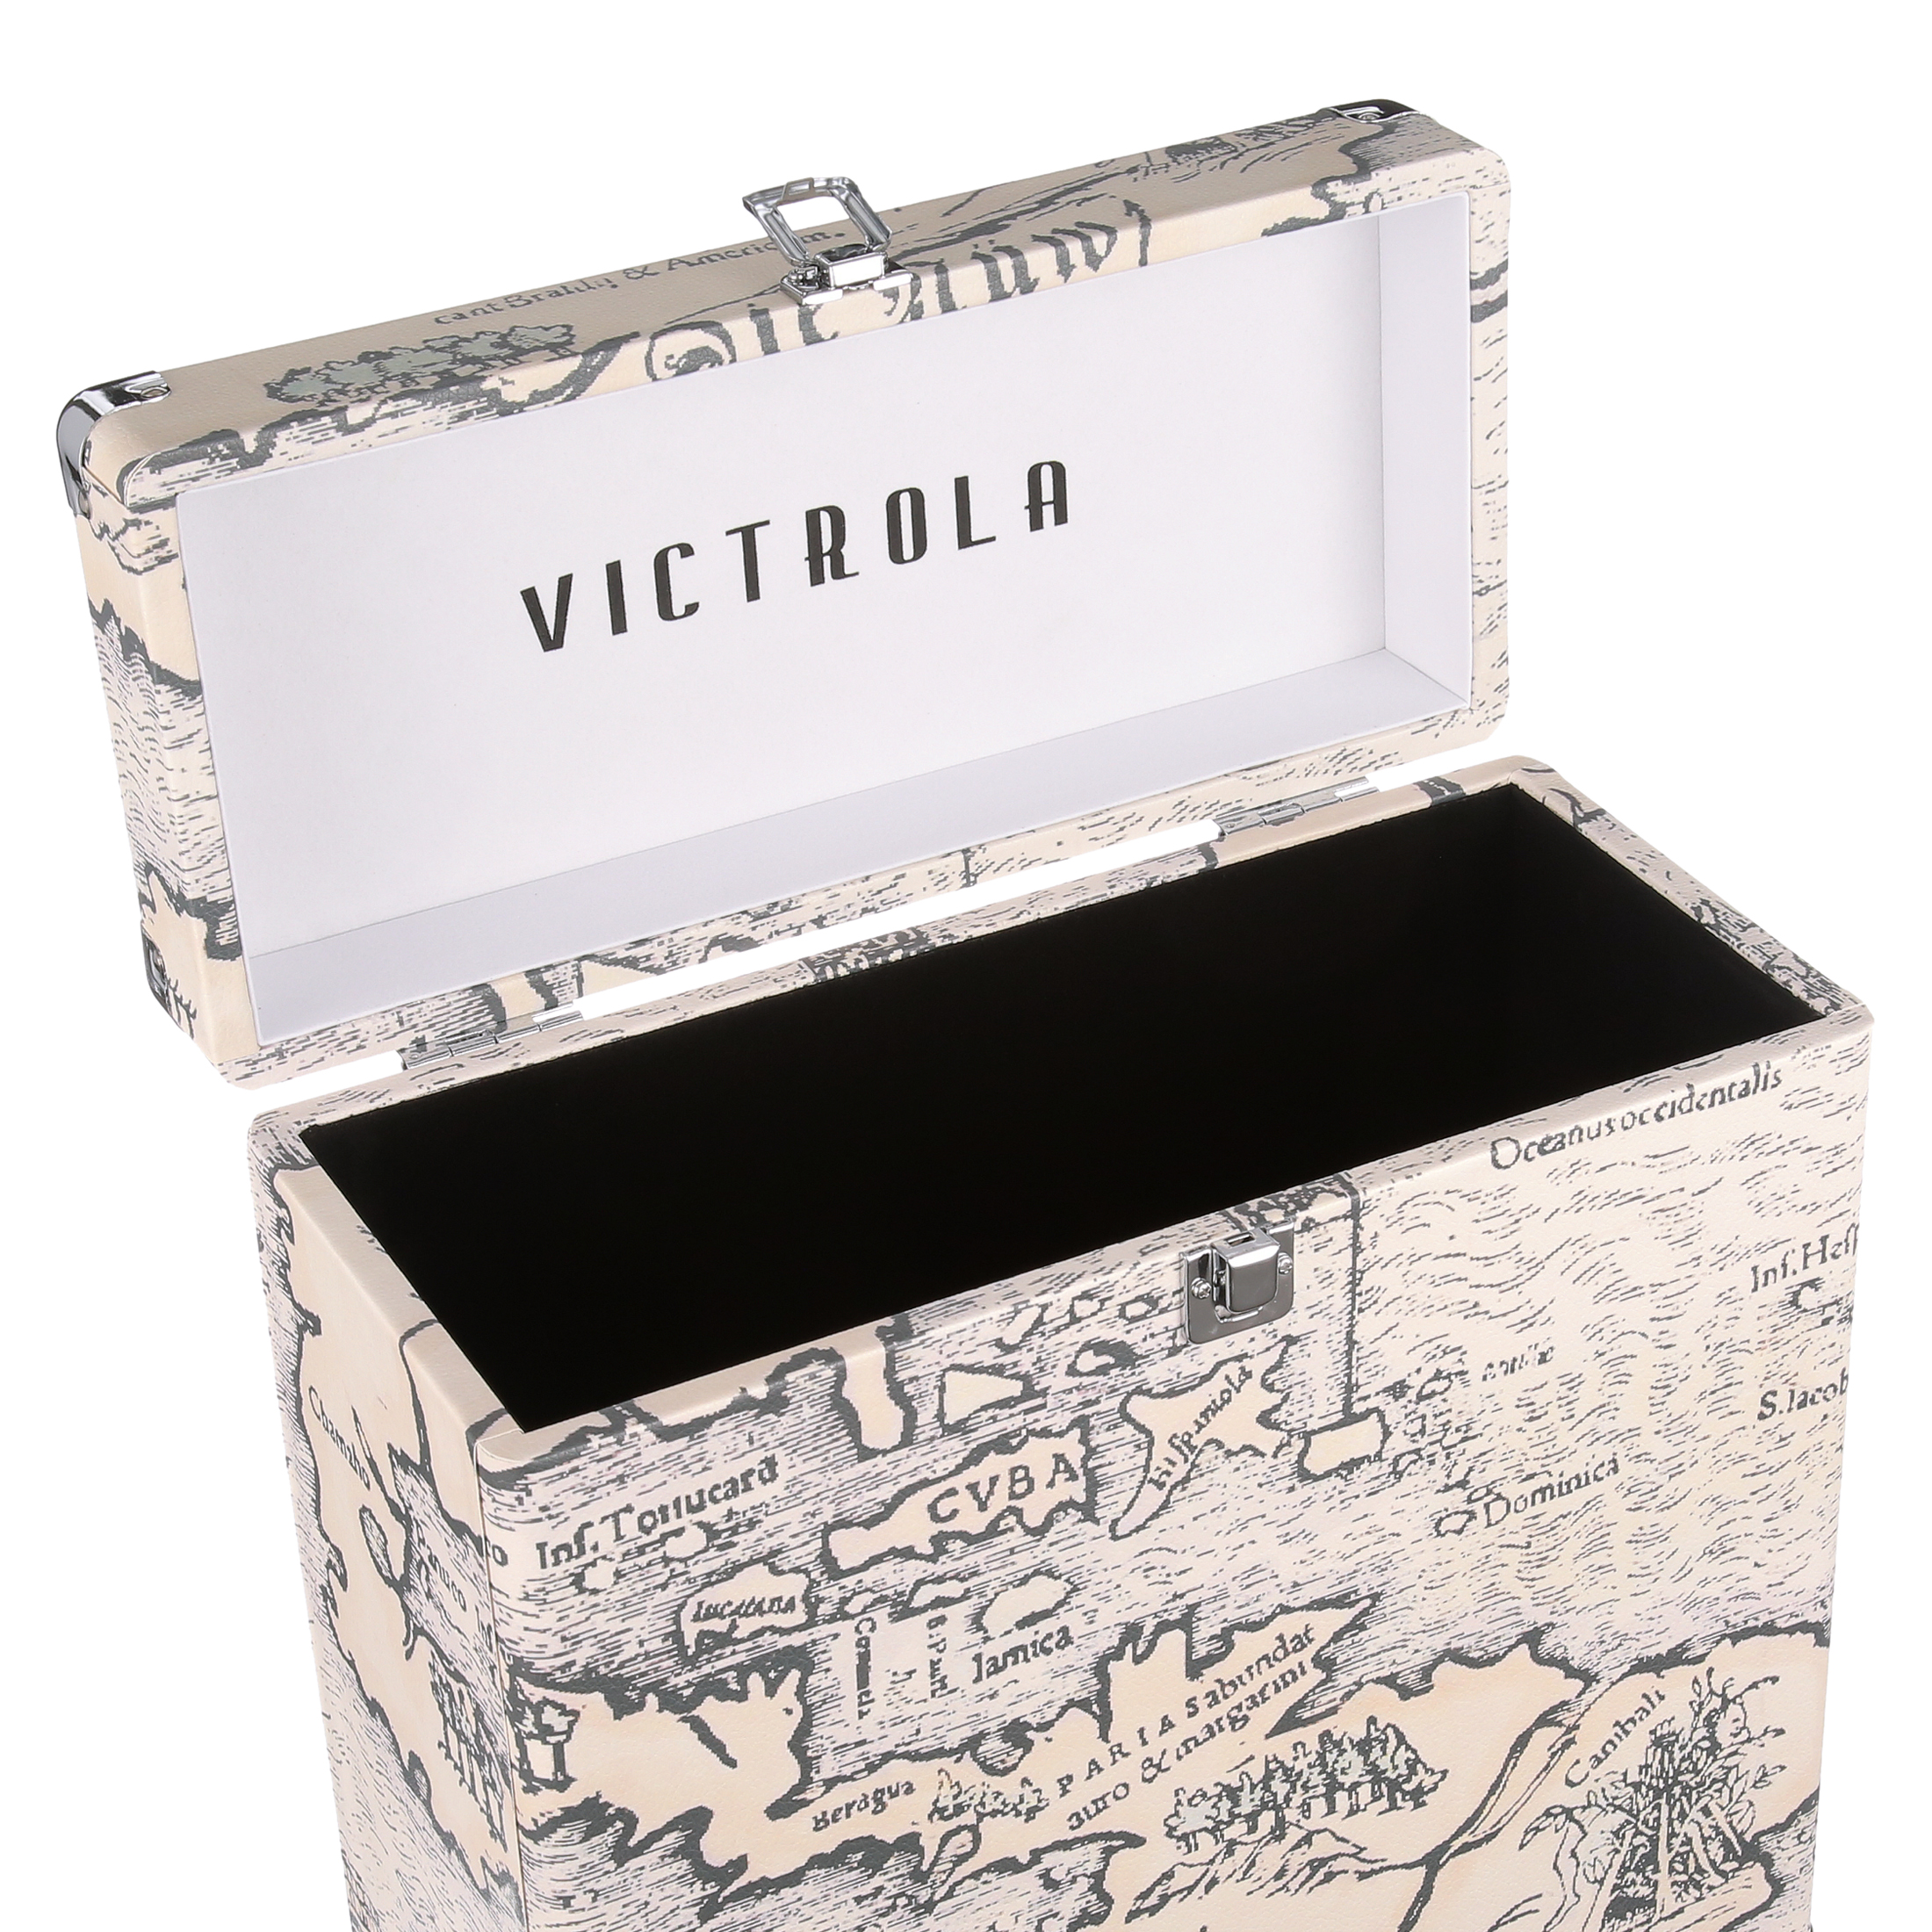 Victrola Collector Storage case for Vinyl Turntable Records - image 3 of 10